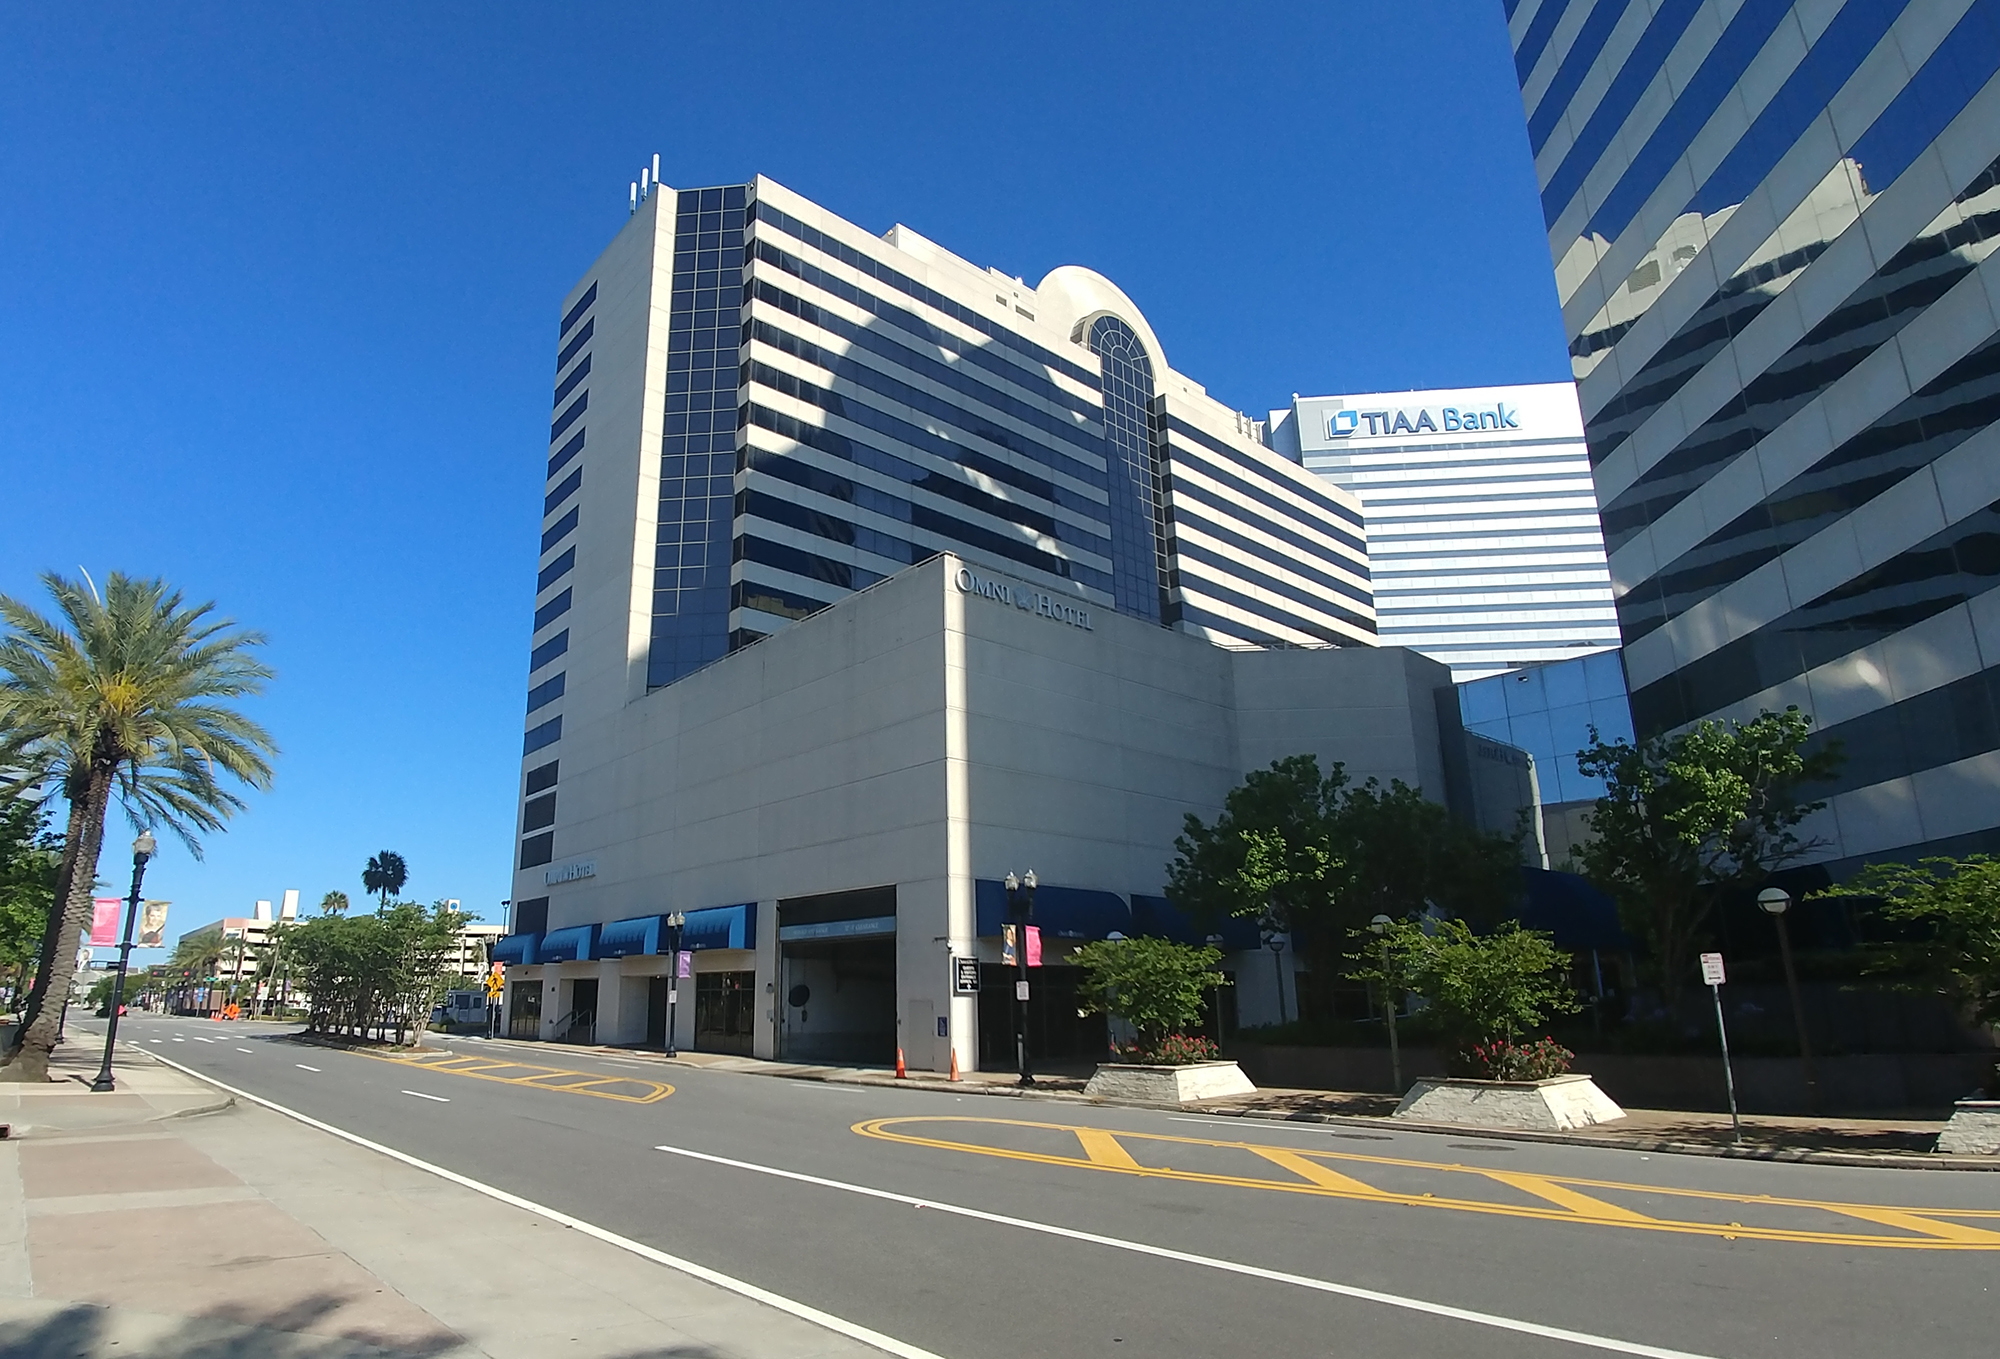 The Marriott Jacksonville Downtown at 245 Water St.